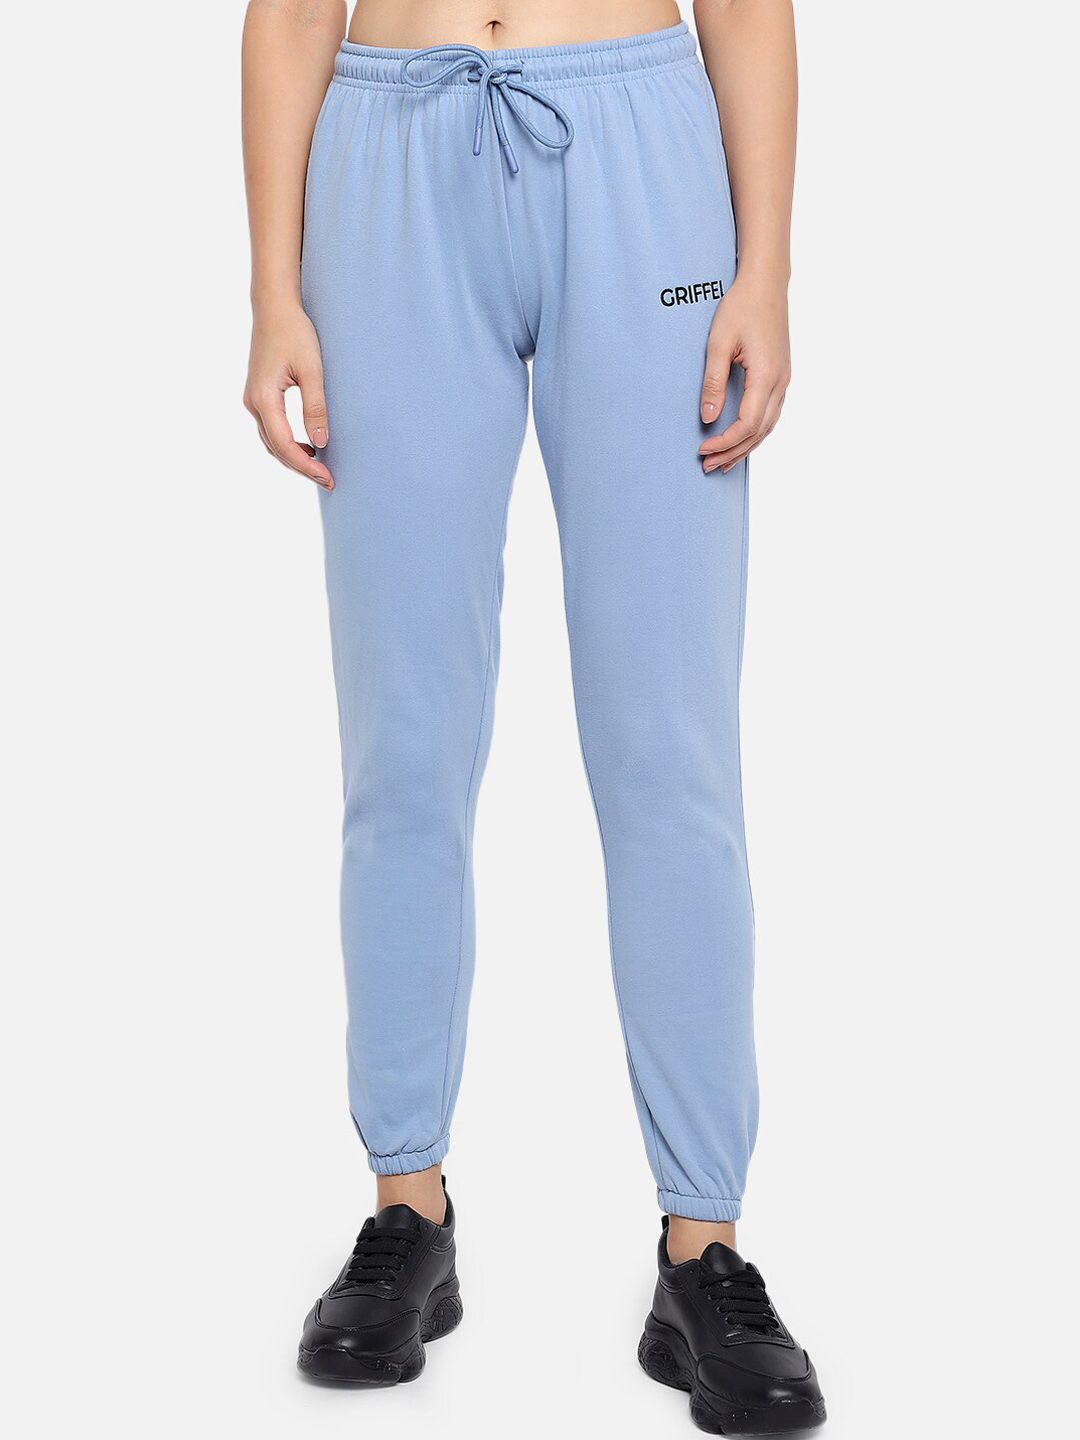 GRIFFEL Women Blue Brand Cotton Joggers Price in India